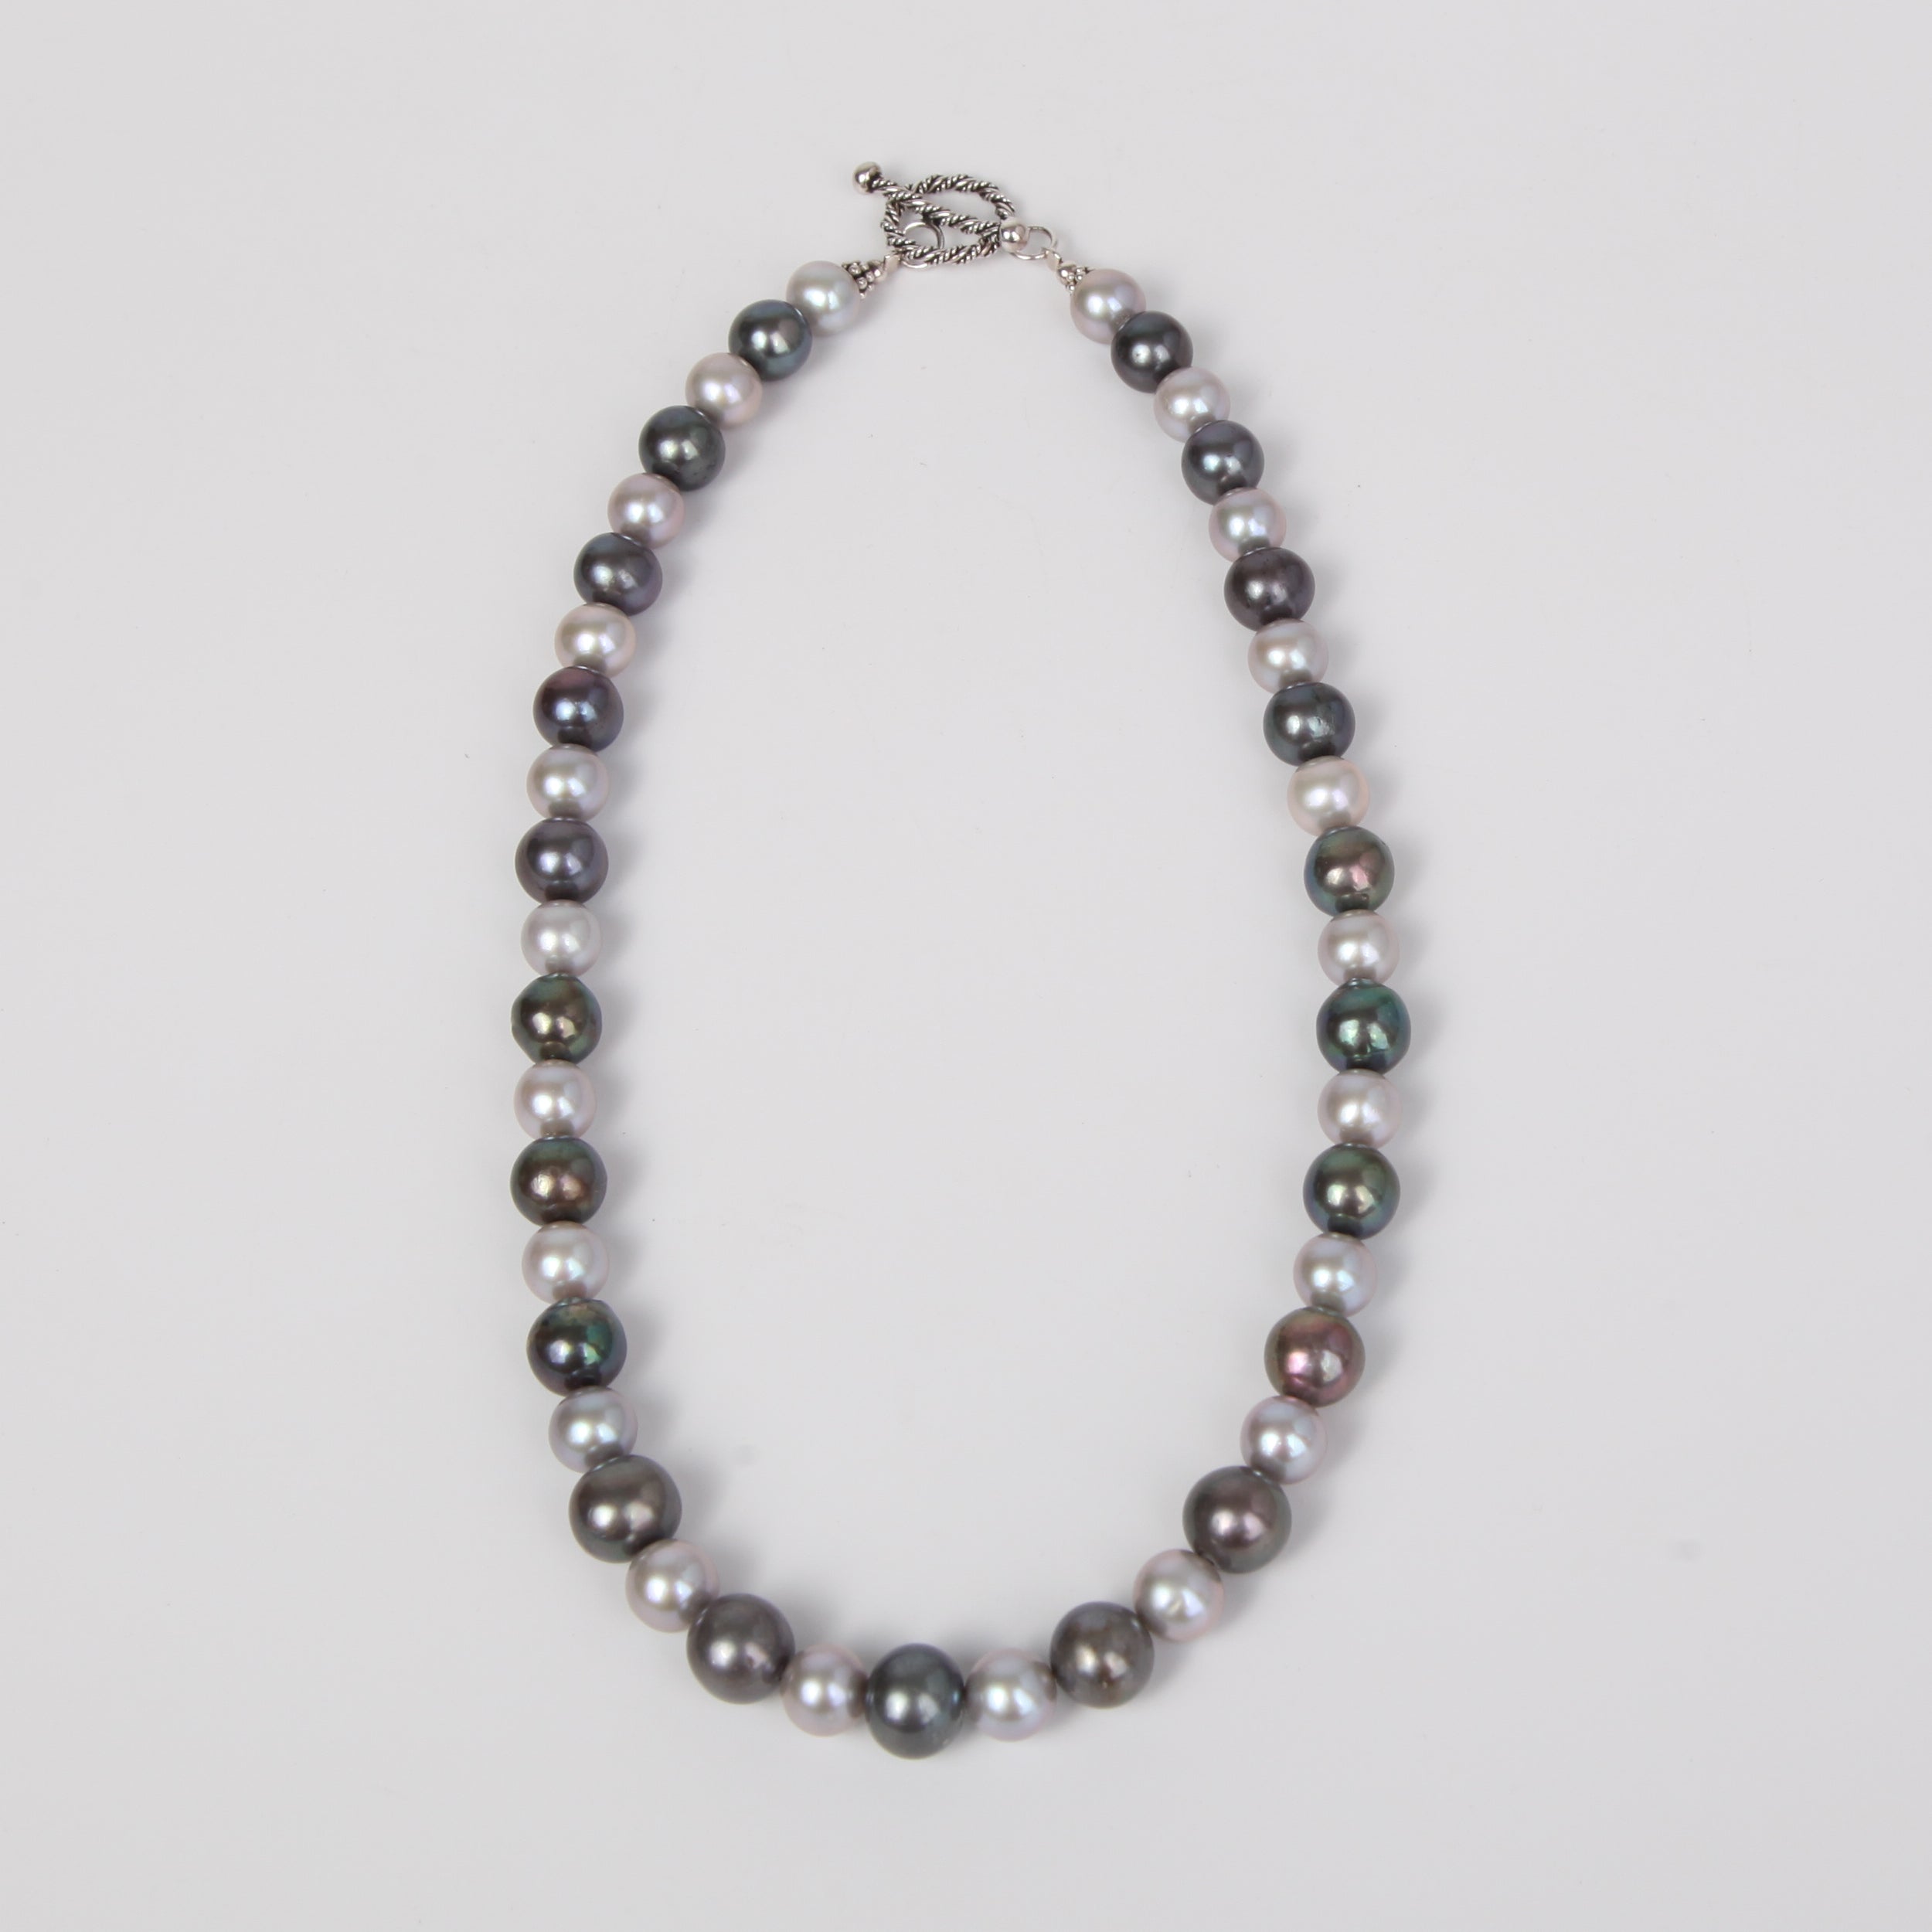 Dark Two Tone Fresh Water Pearl Necklace with Sterling Silver